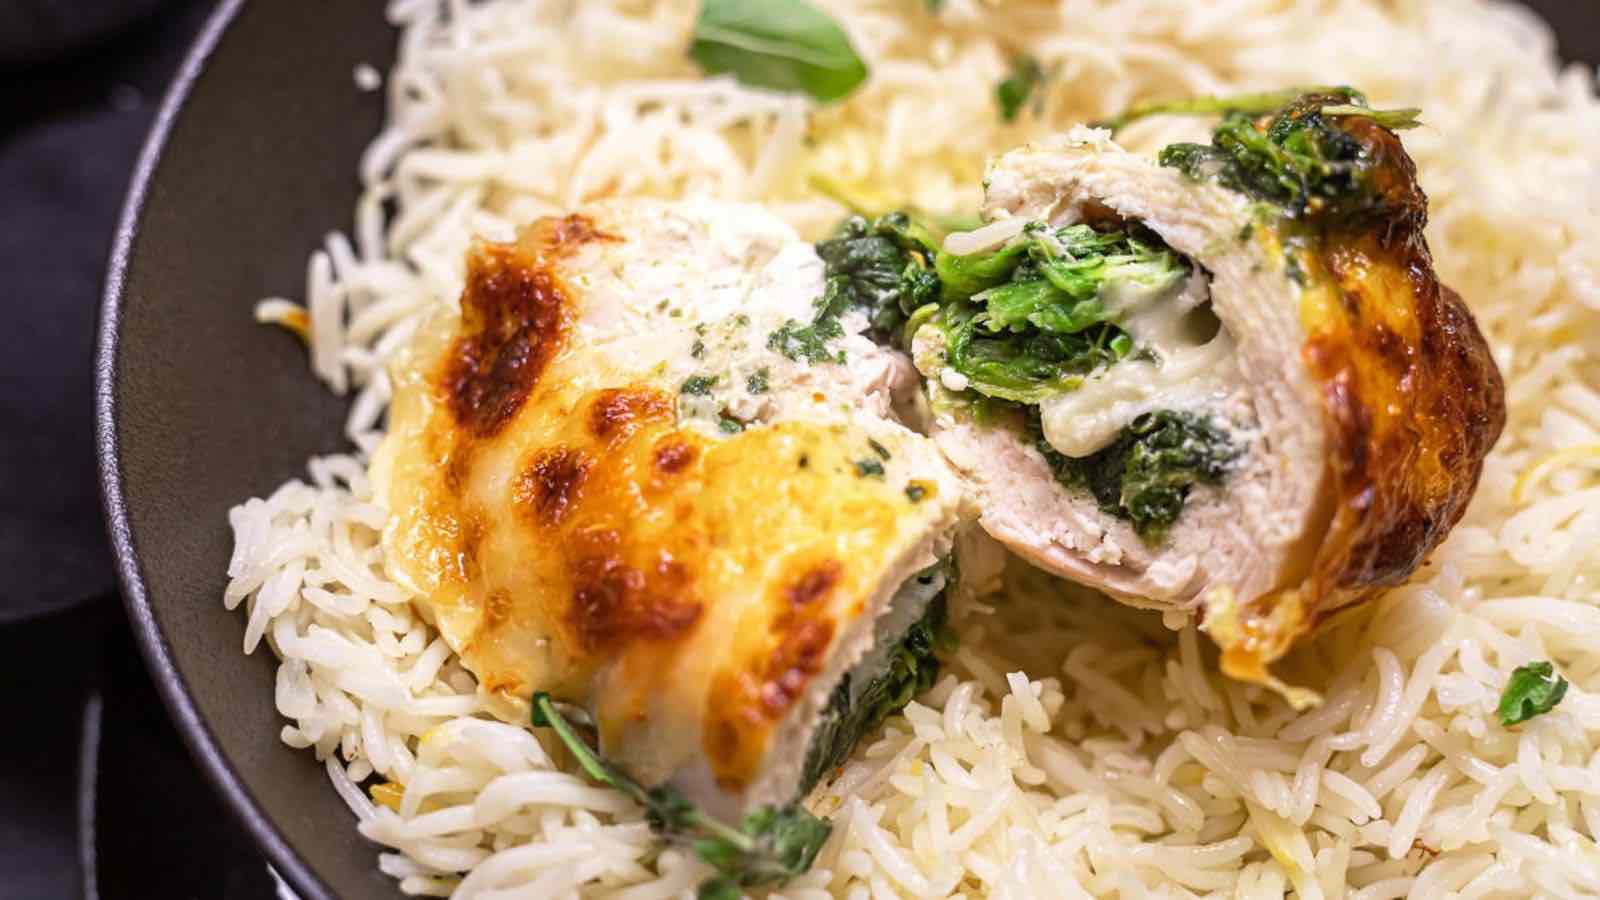 Chicken stuffed with spinach and cheese on a bed of rice.